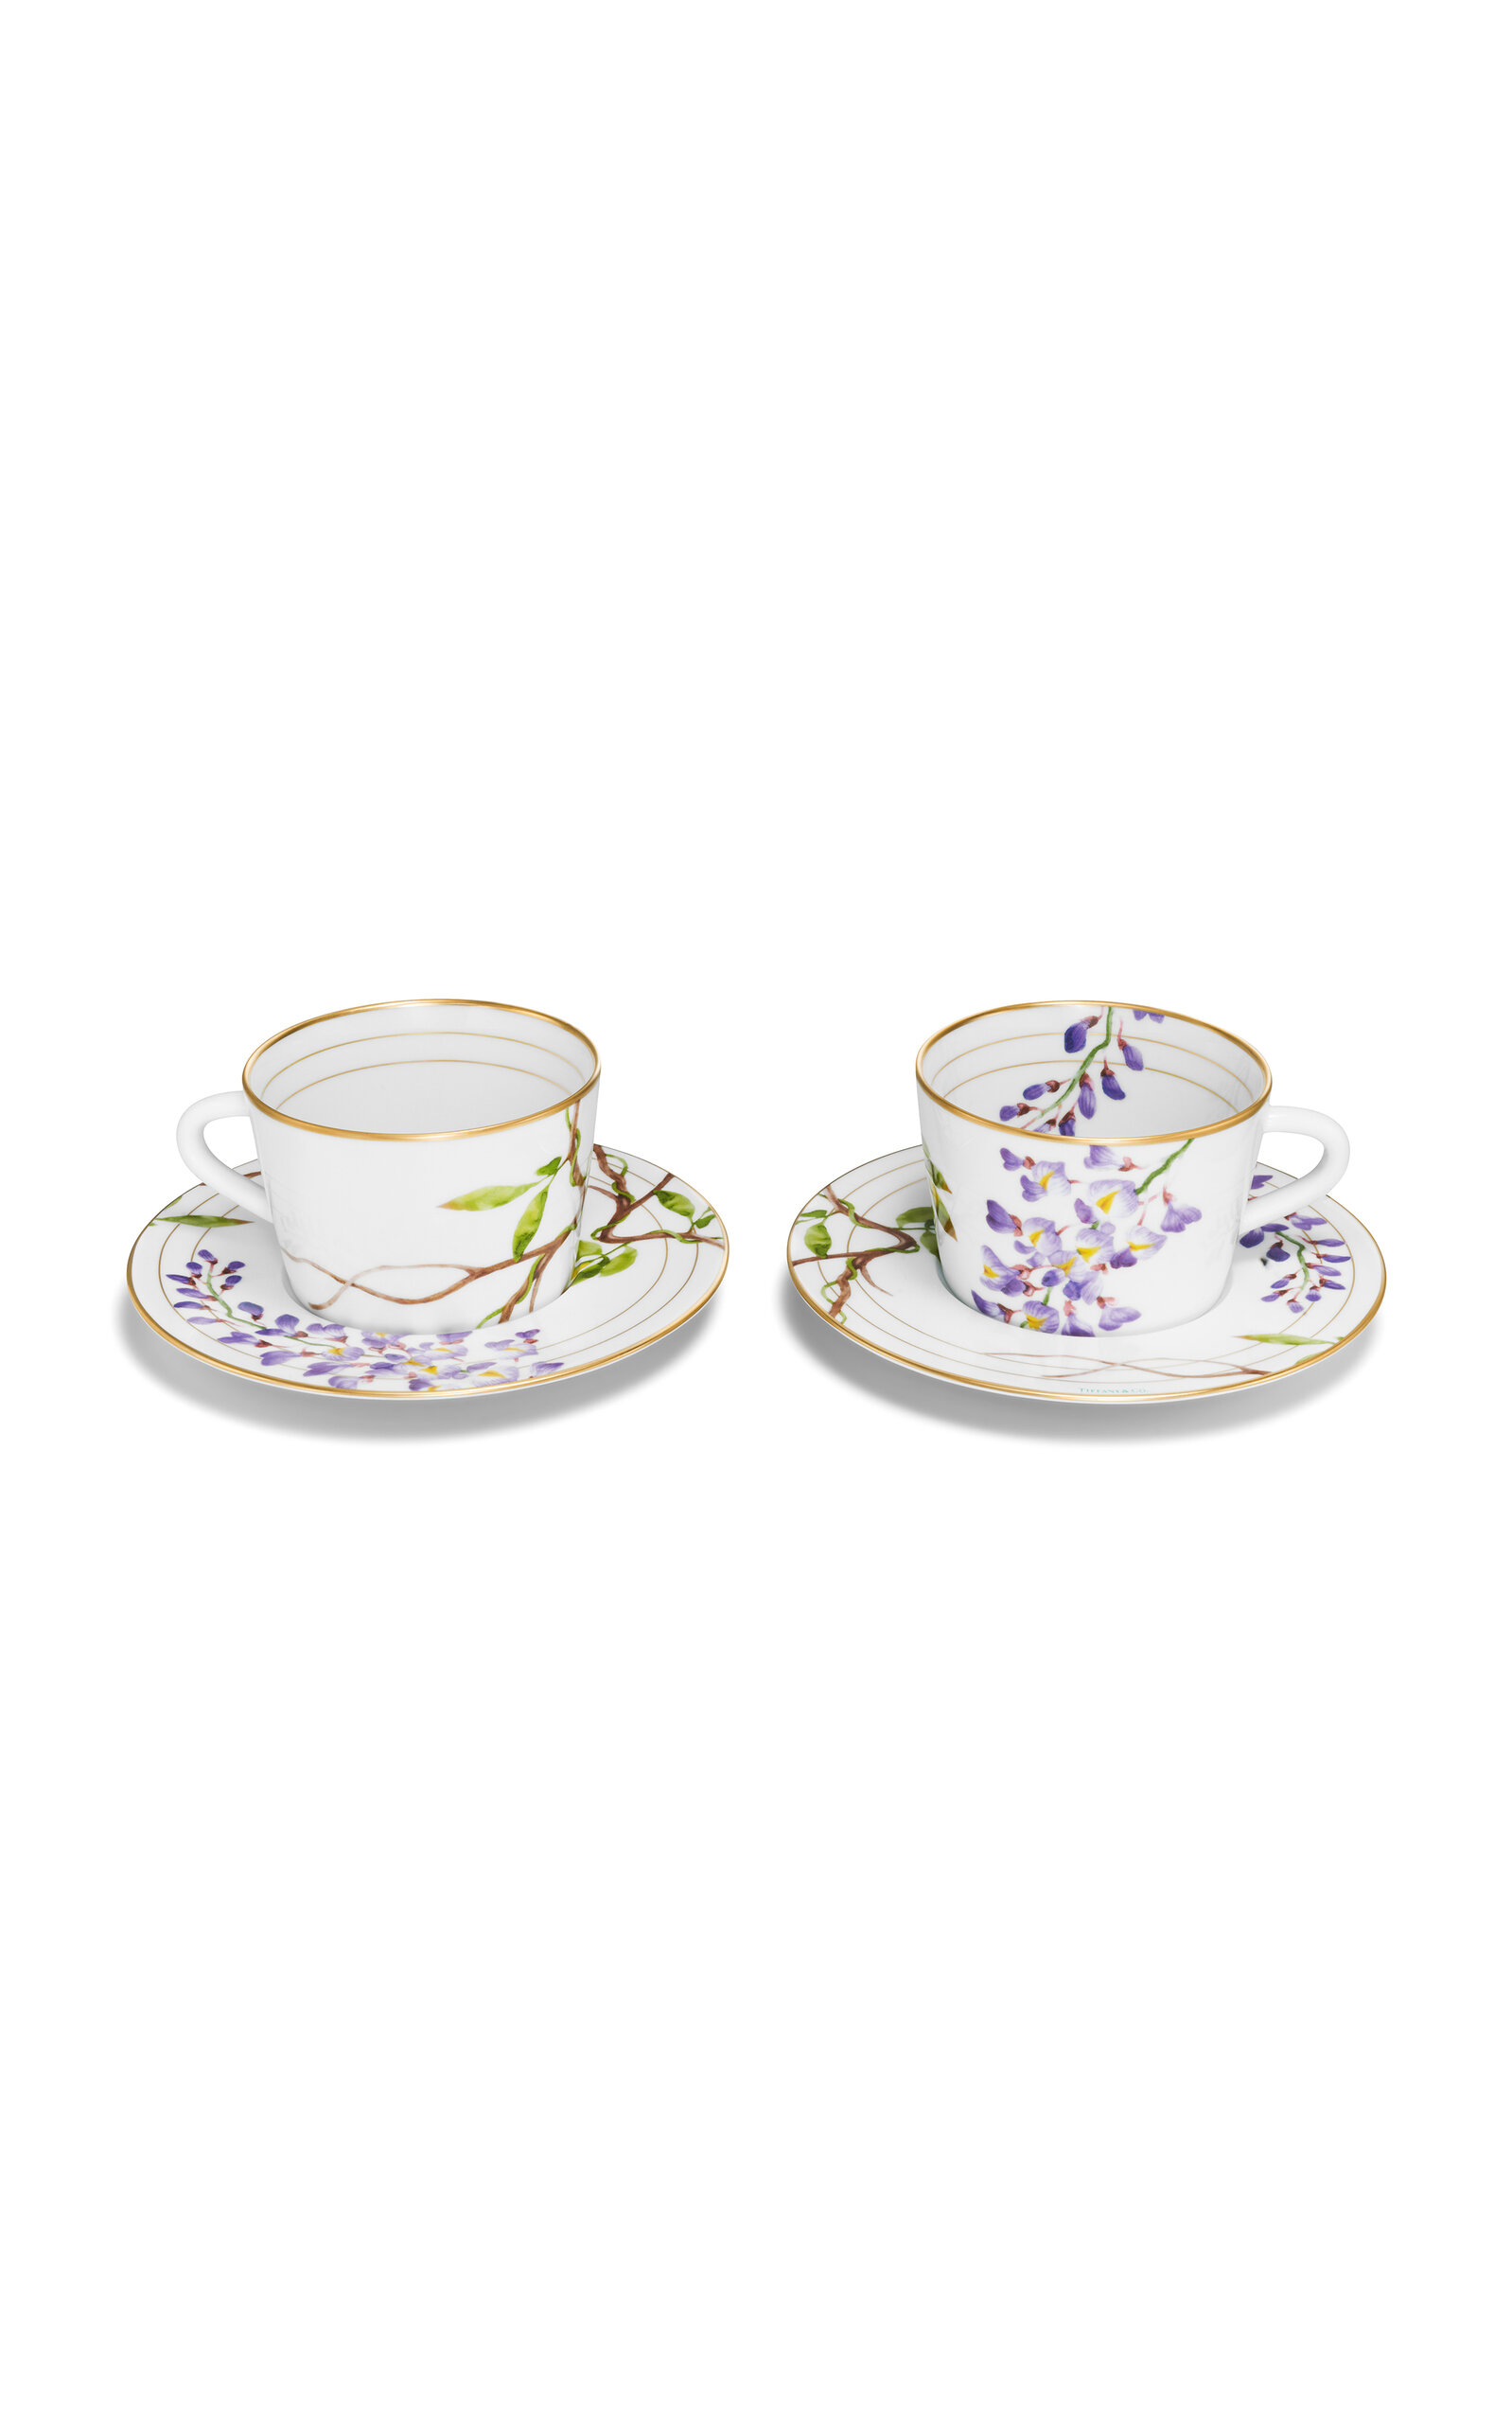 Tiffany & Co Wisteria Set-of-two Porcelain Teacup And Saucers In Multi